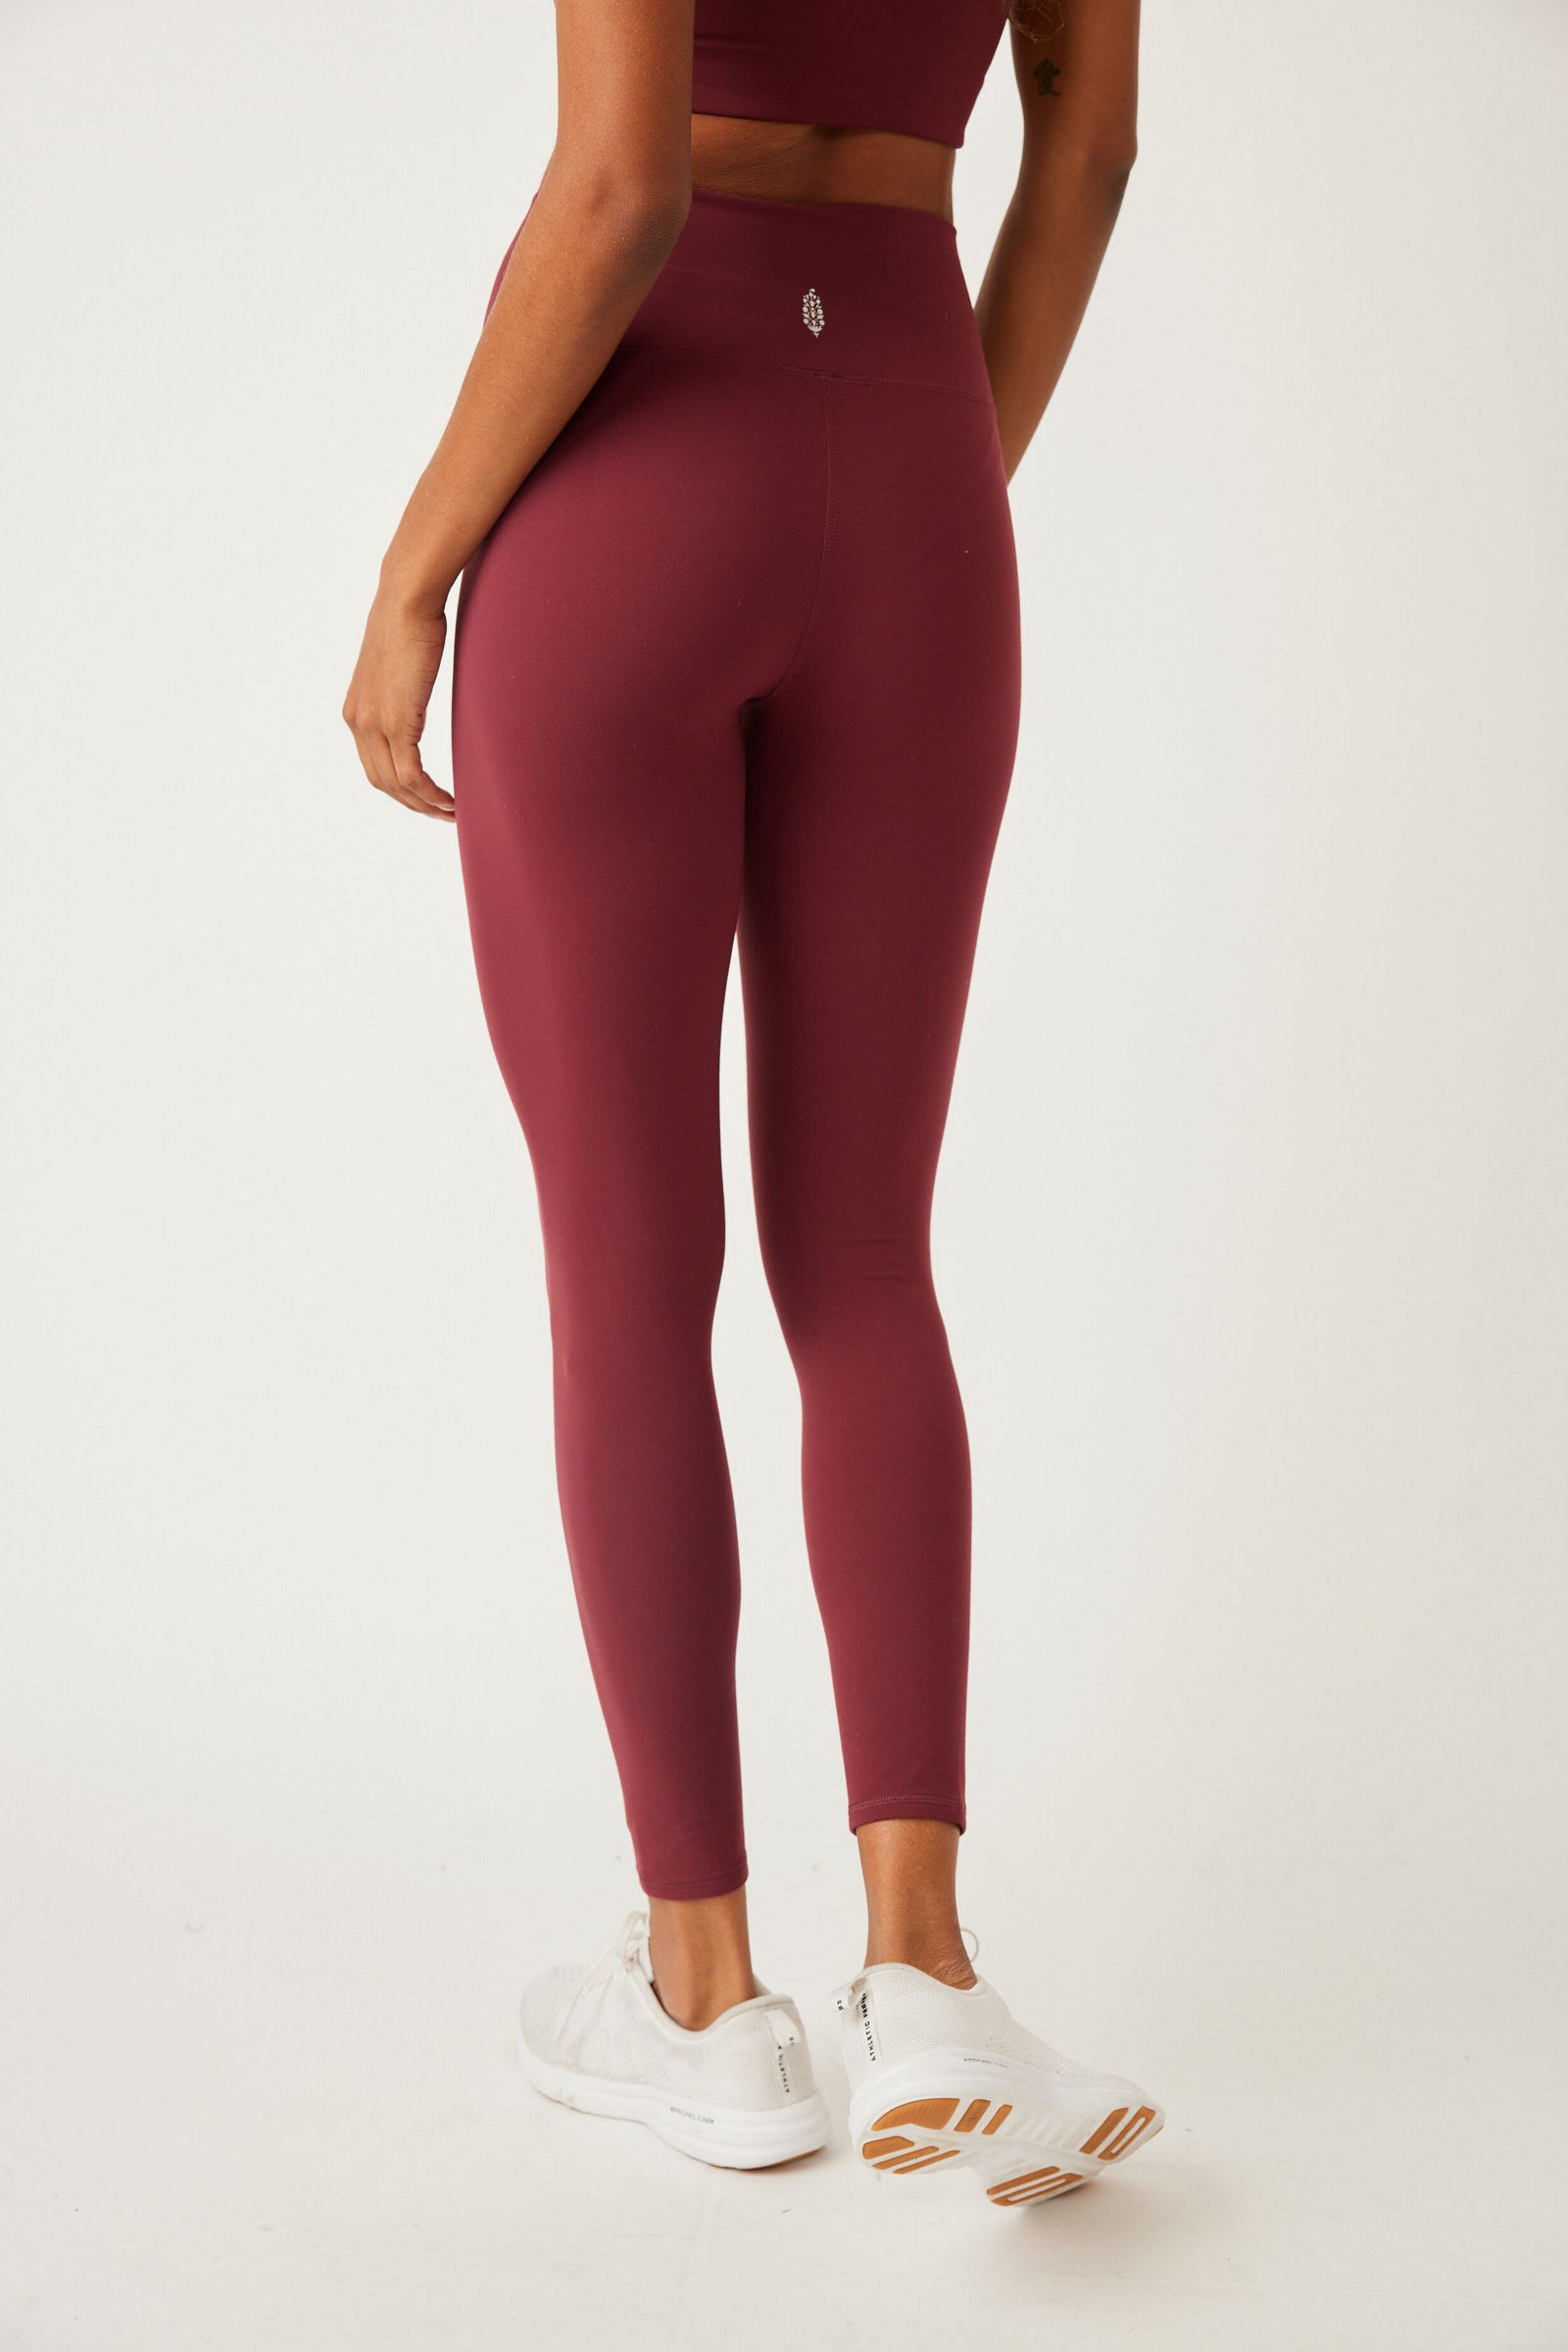 FREE PEOPLE NEVER BETTER LEGGING OXBLOOD – Bubble Lounge Boutique